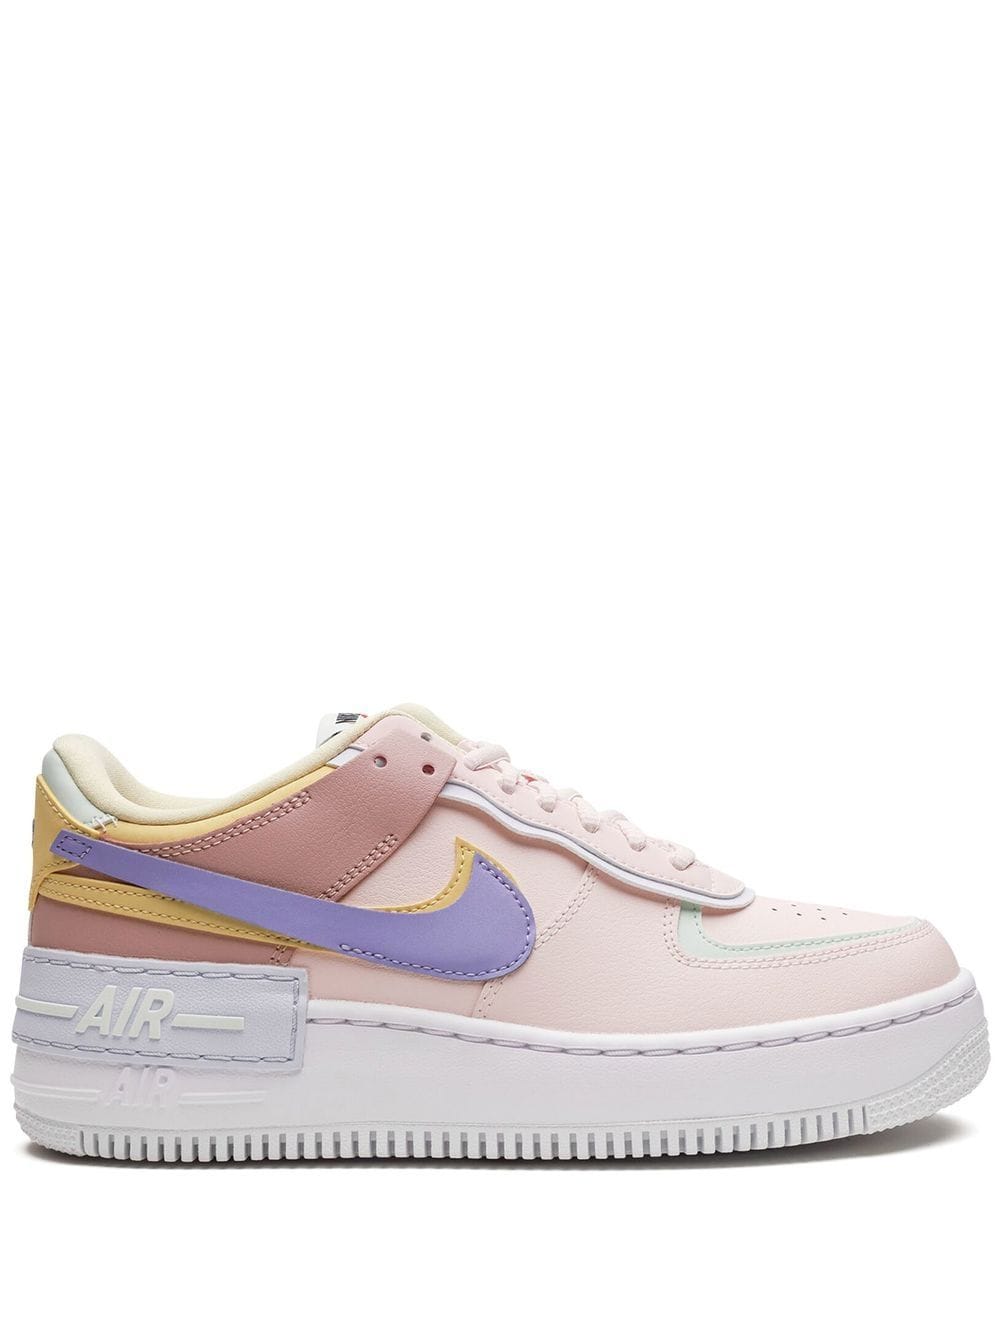 Nike Air Force 1 Low Shadow "Soft Pink" sneakers von Nike